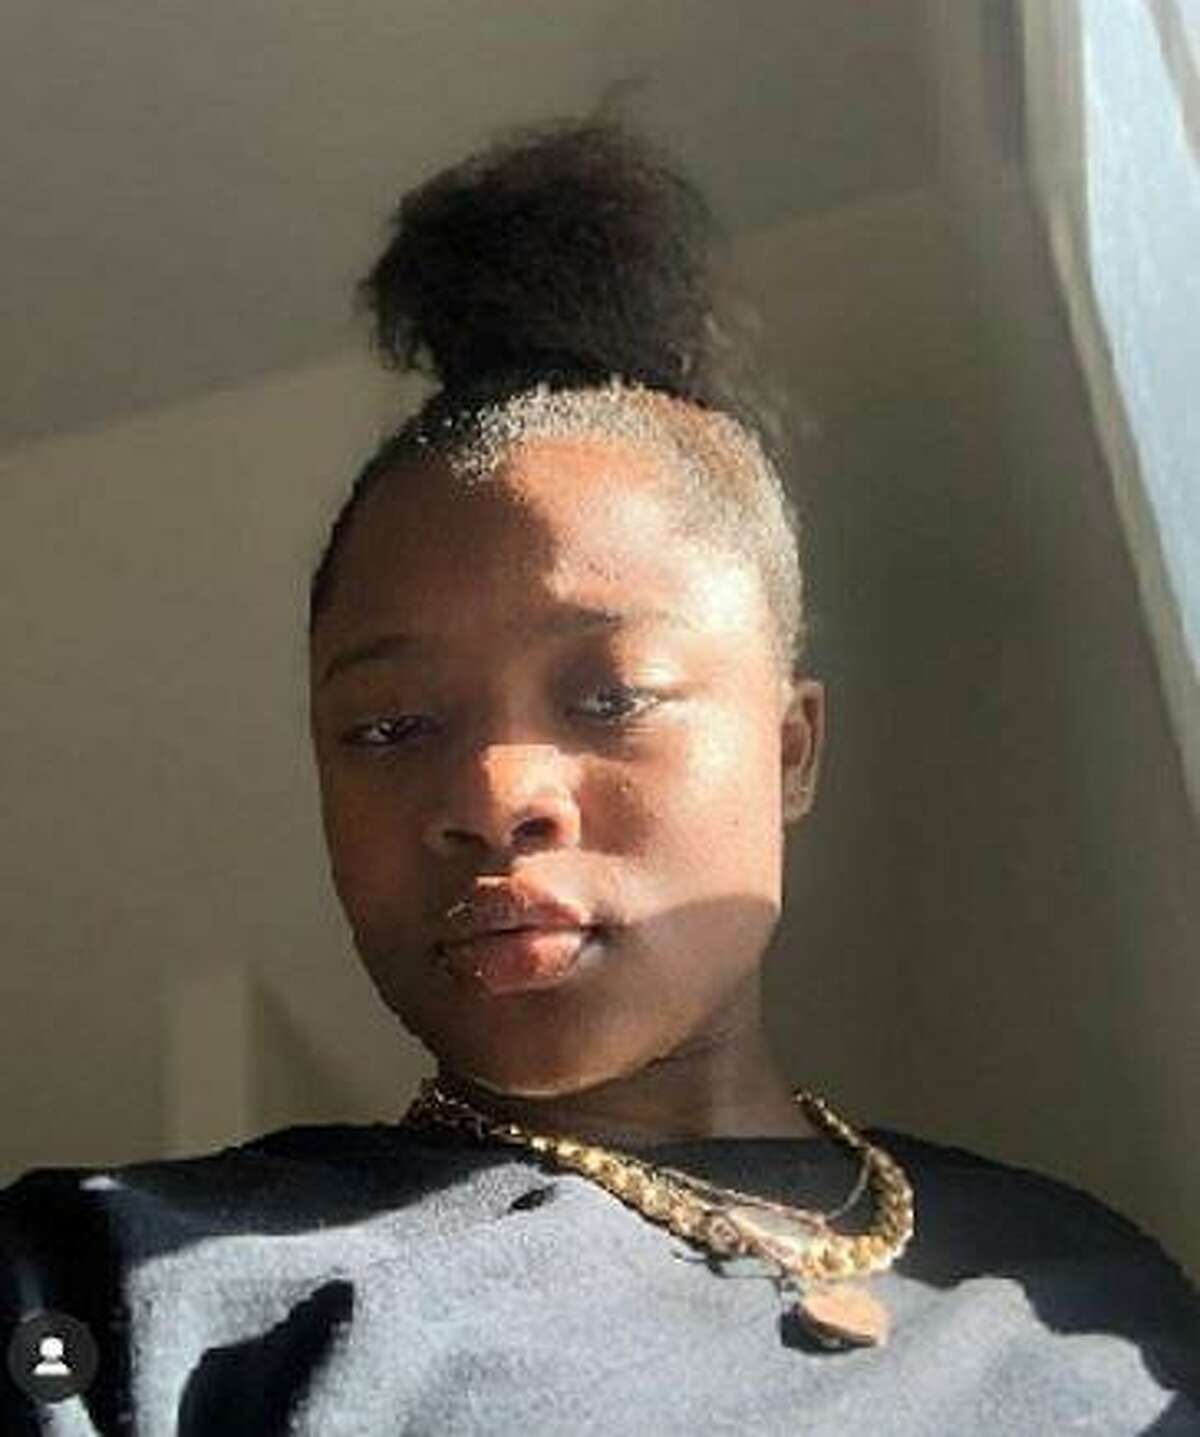 Silver Alert issued for 14-year-old girl reported missing from New Haven